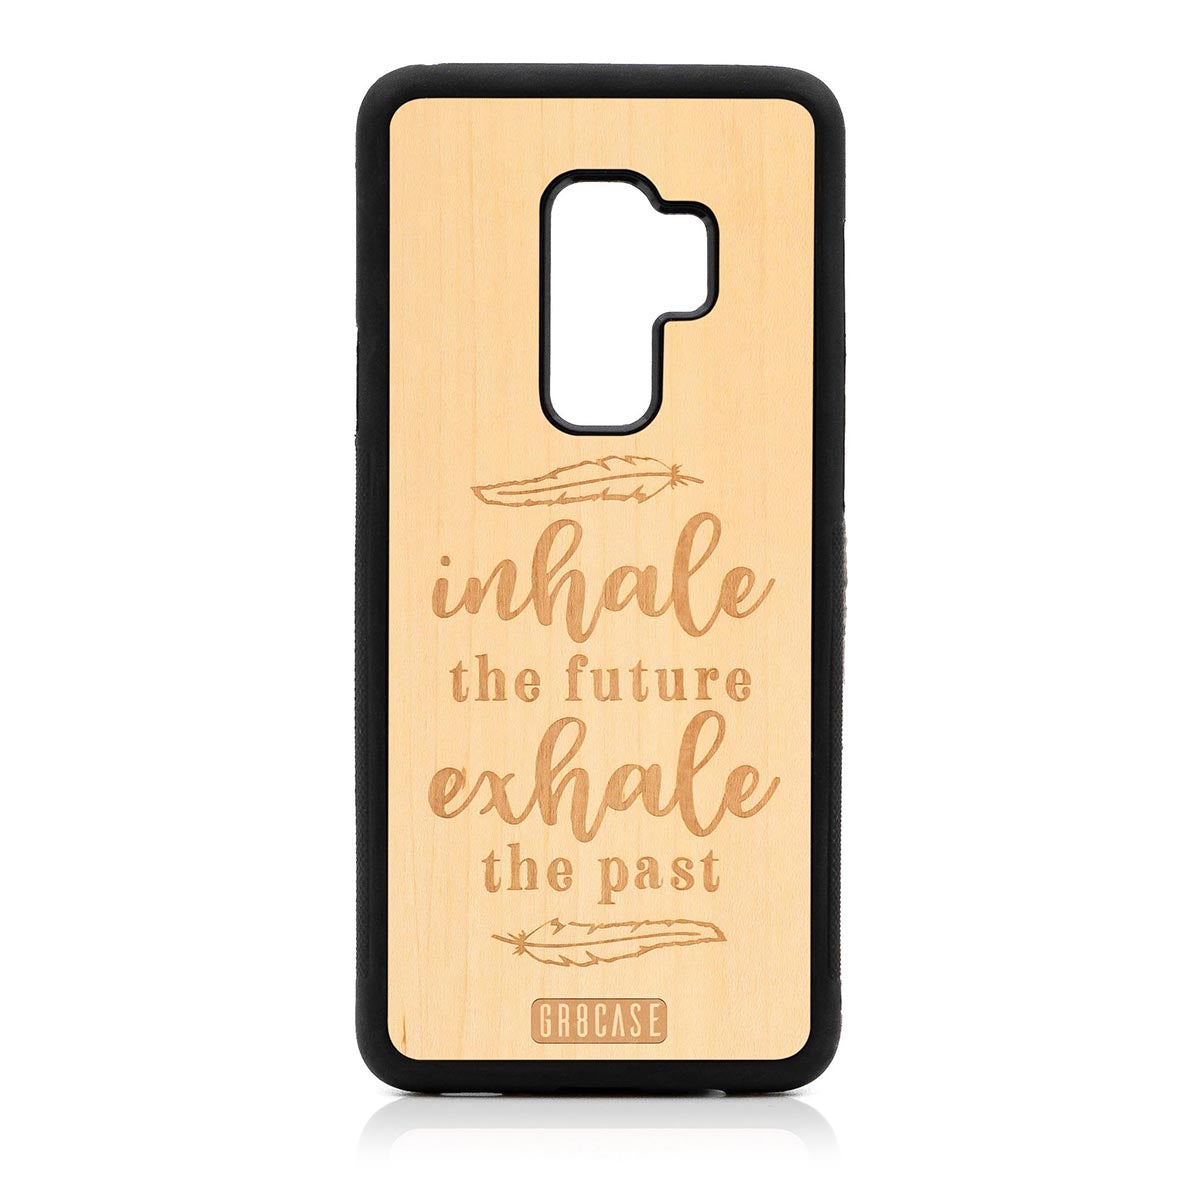 Inhale The Future Exhale The Past Design Wood Case Samsung Galaxy S9 Plus by GR8CASE